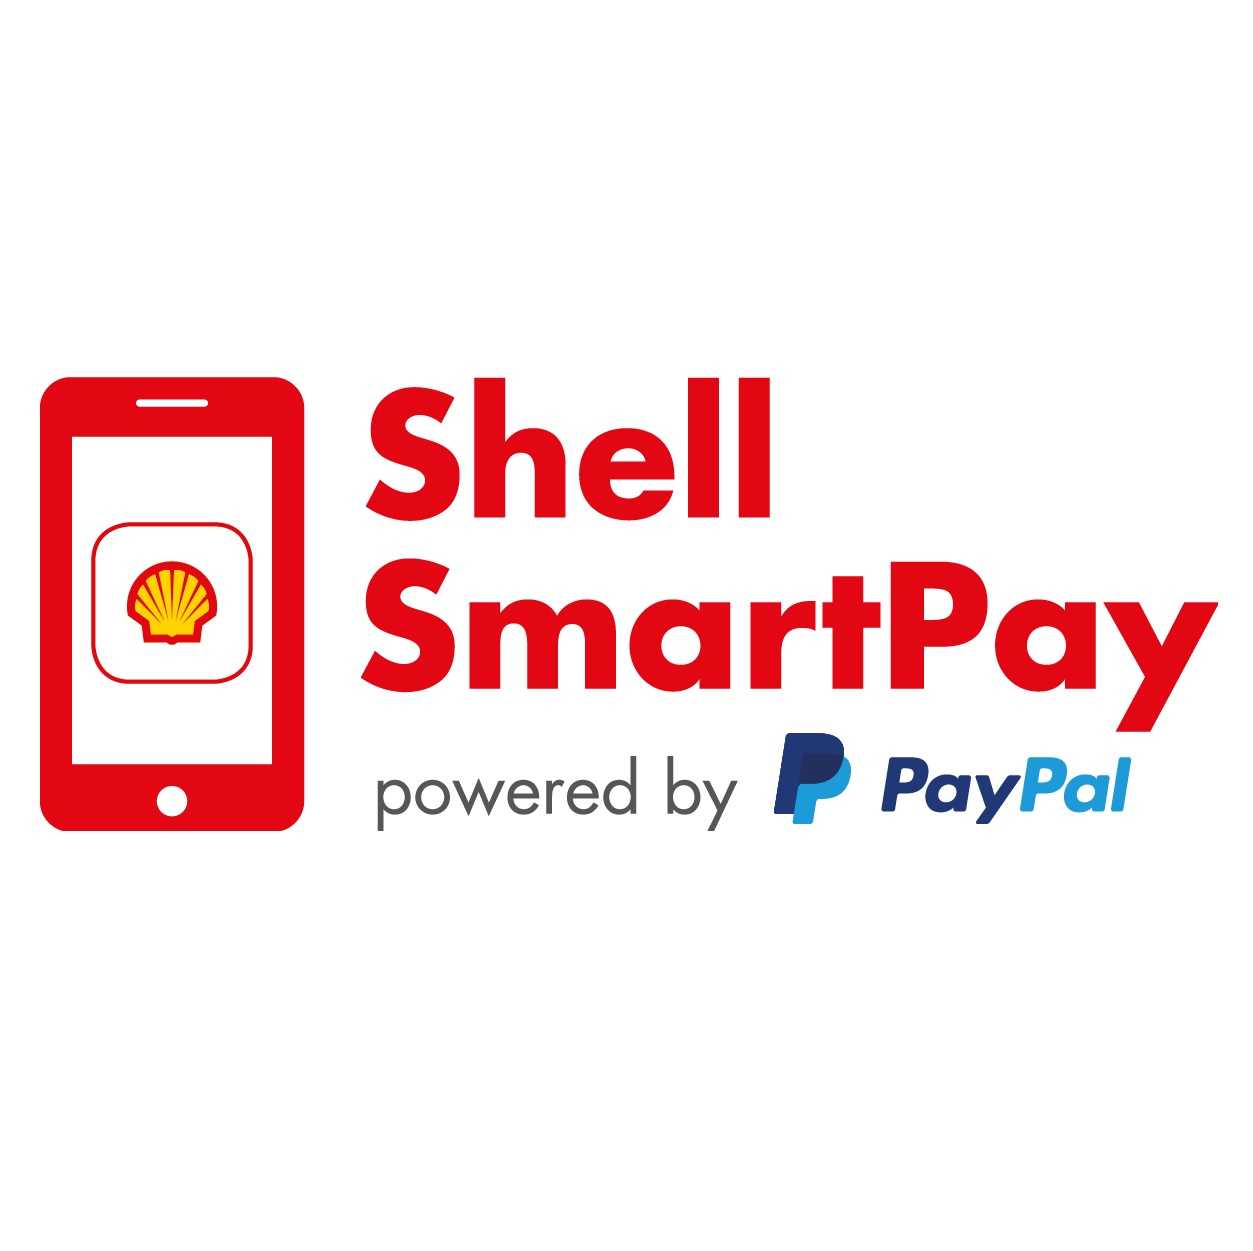 Shell smartpay PayPal